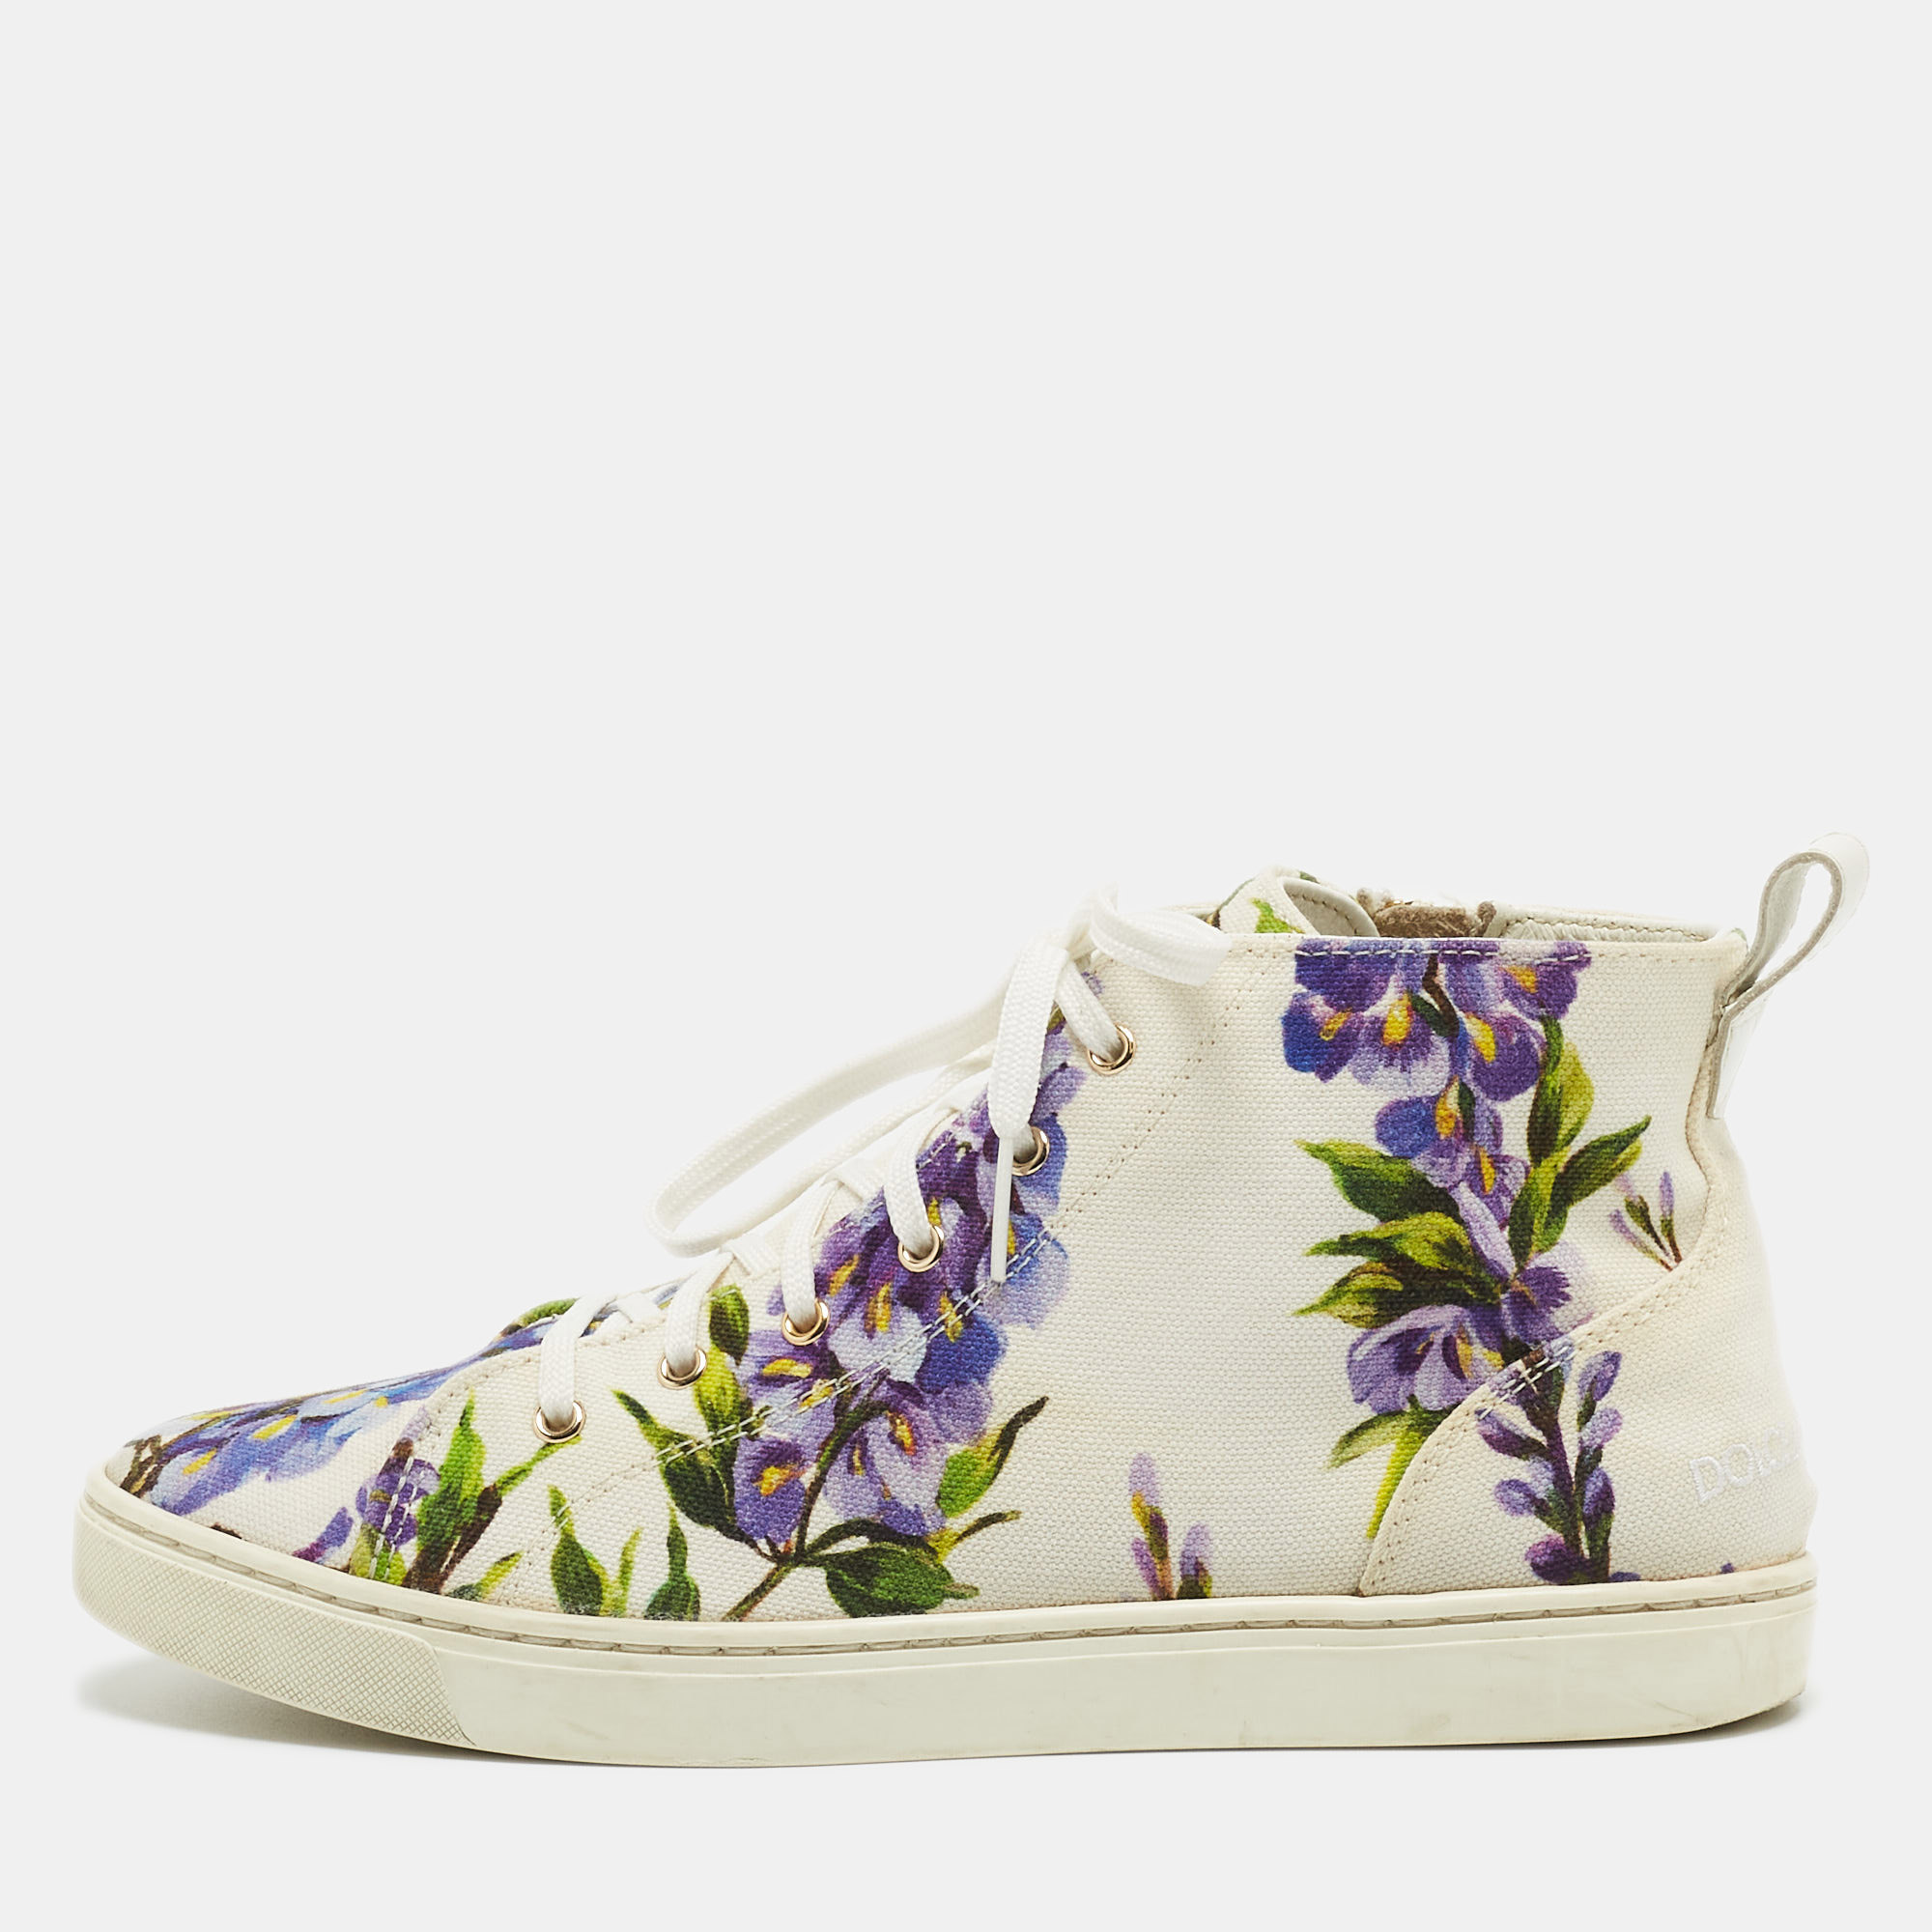 Dolce & gabbana white floral print canvas high top sneakers size 37.5